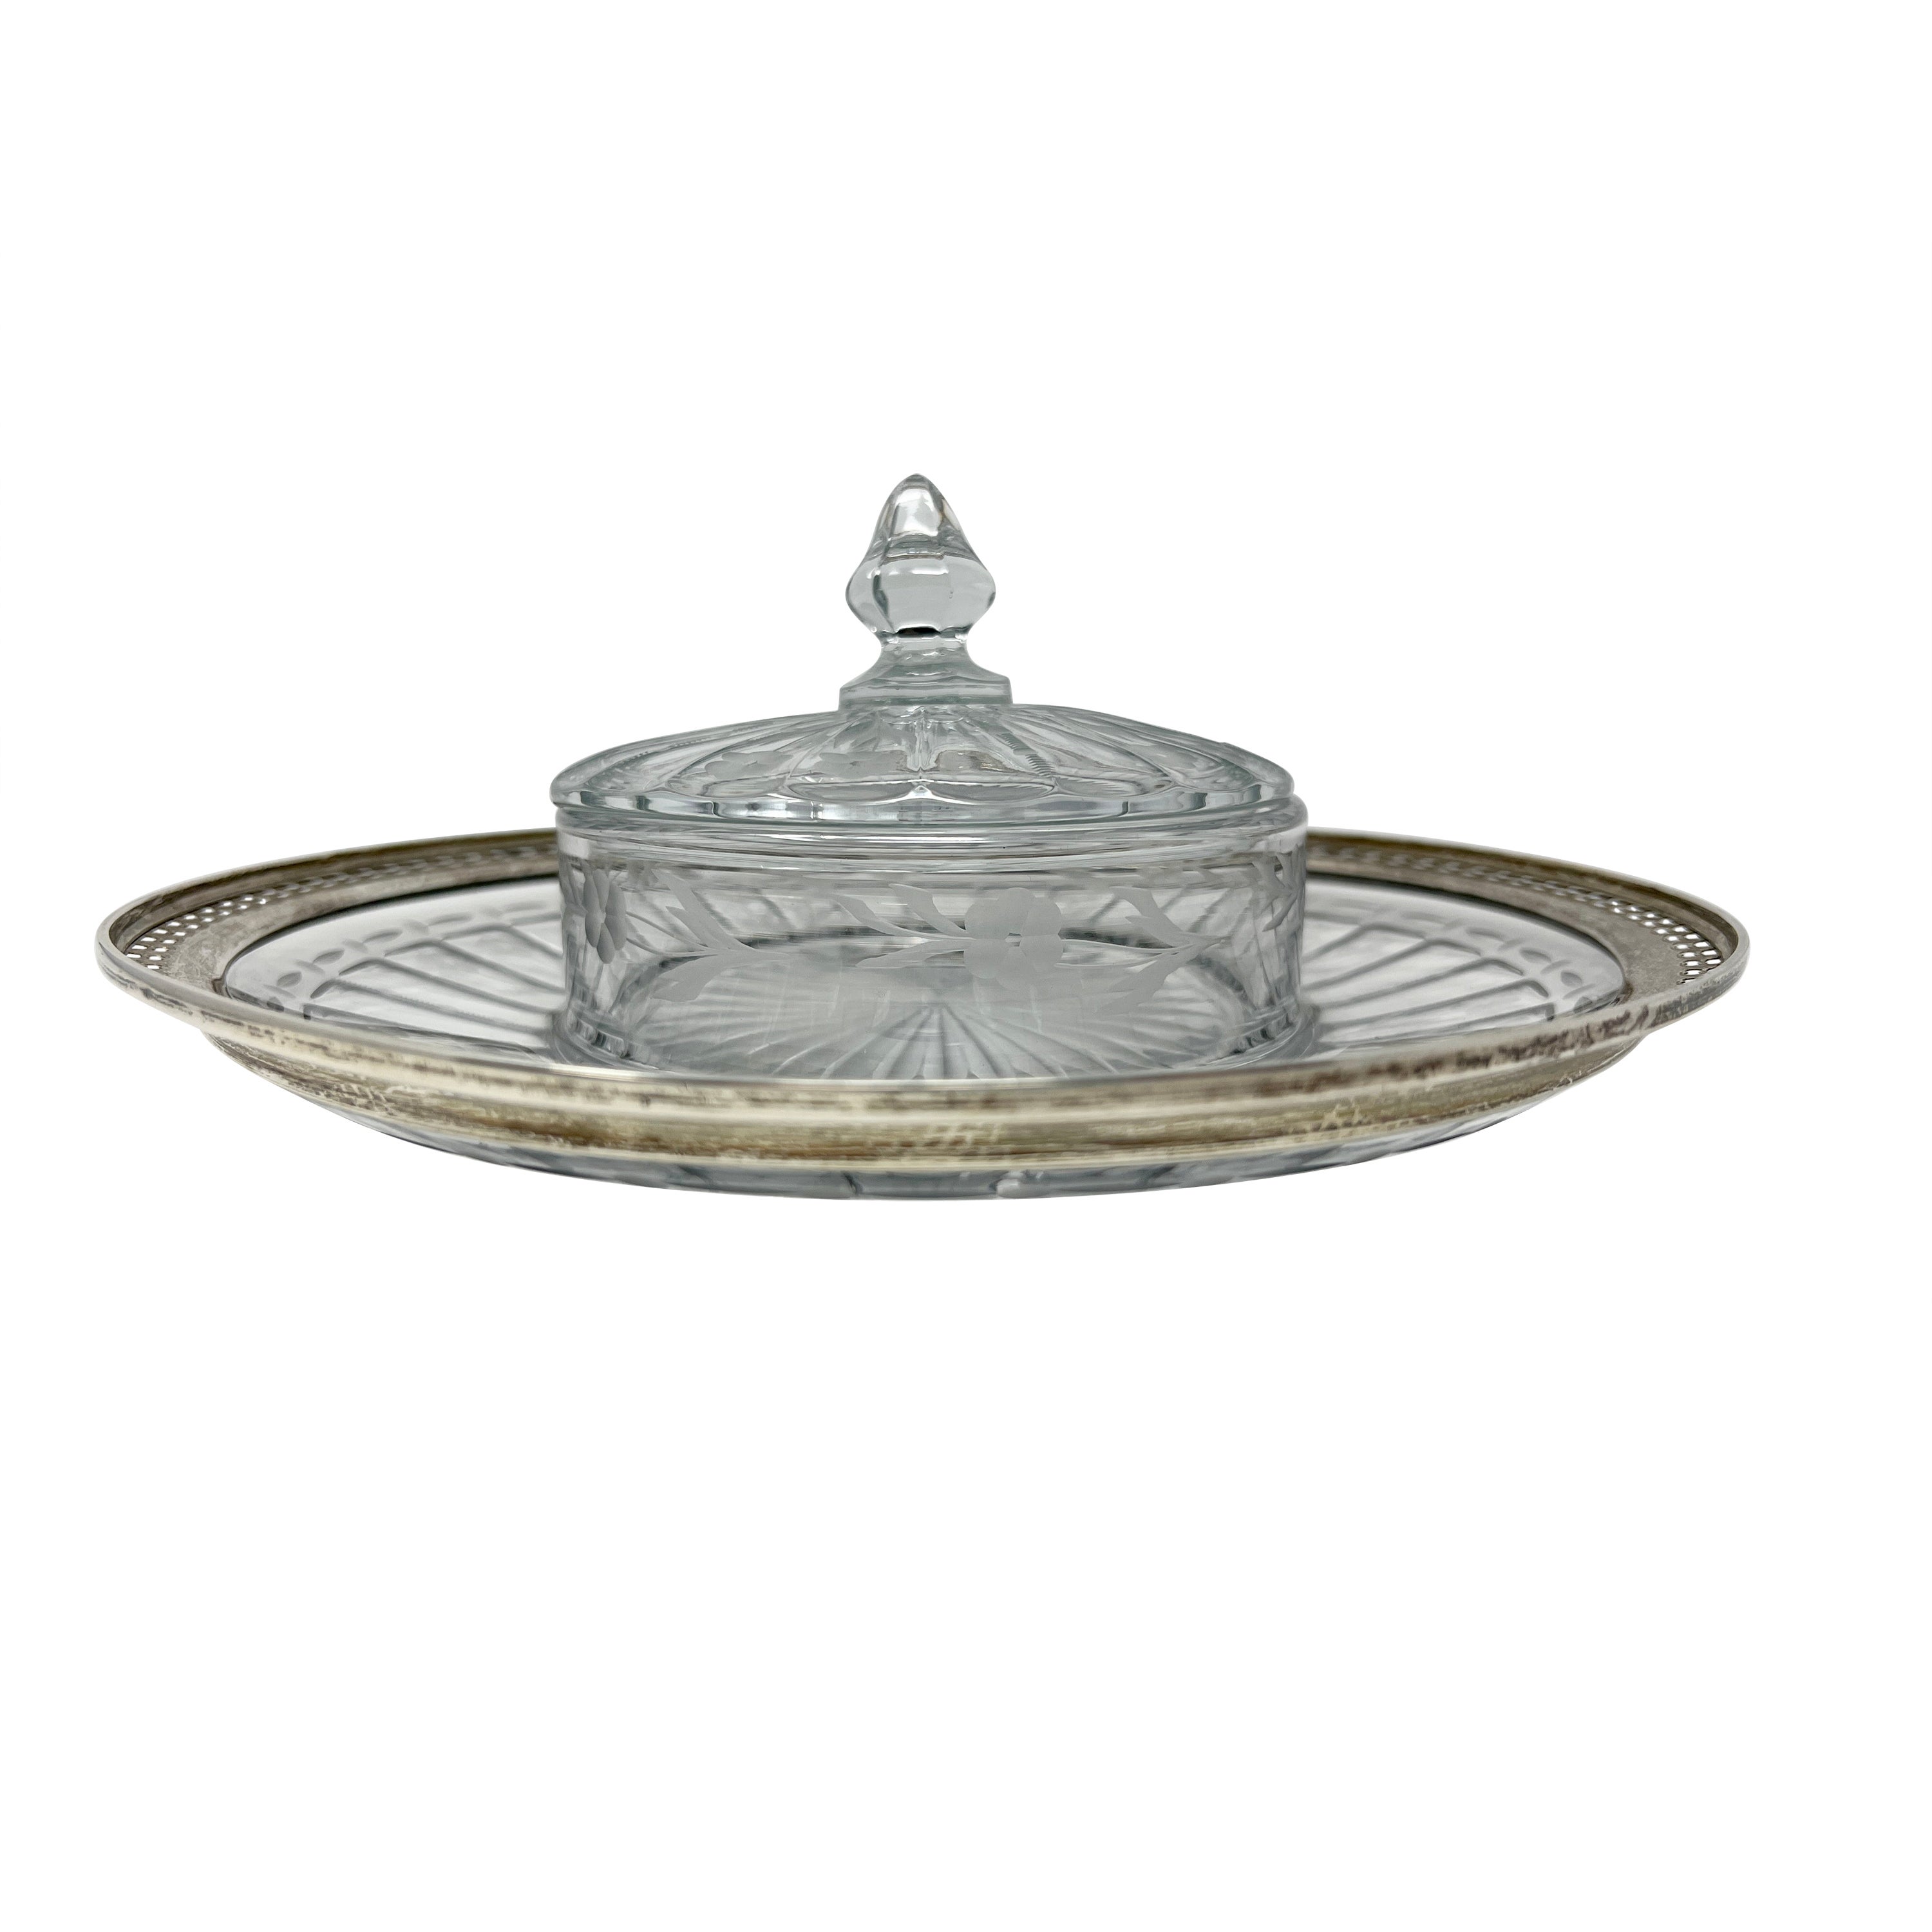 Antique Cut Crystal and Silver Edged Caviar Dish with Cover, Circa 1910-1920. For Sale